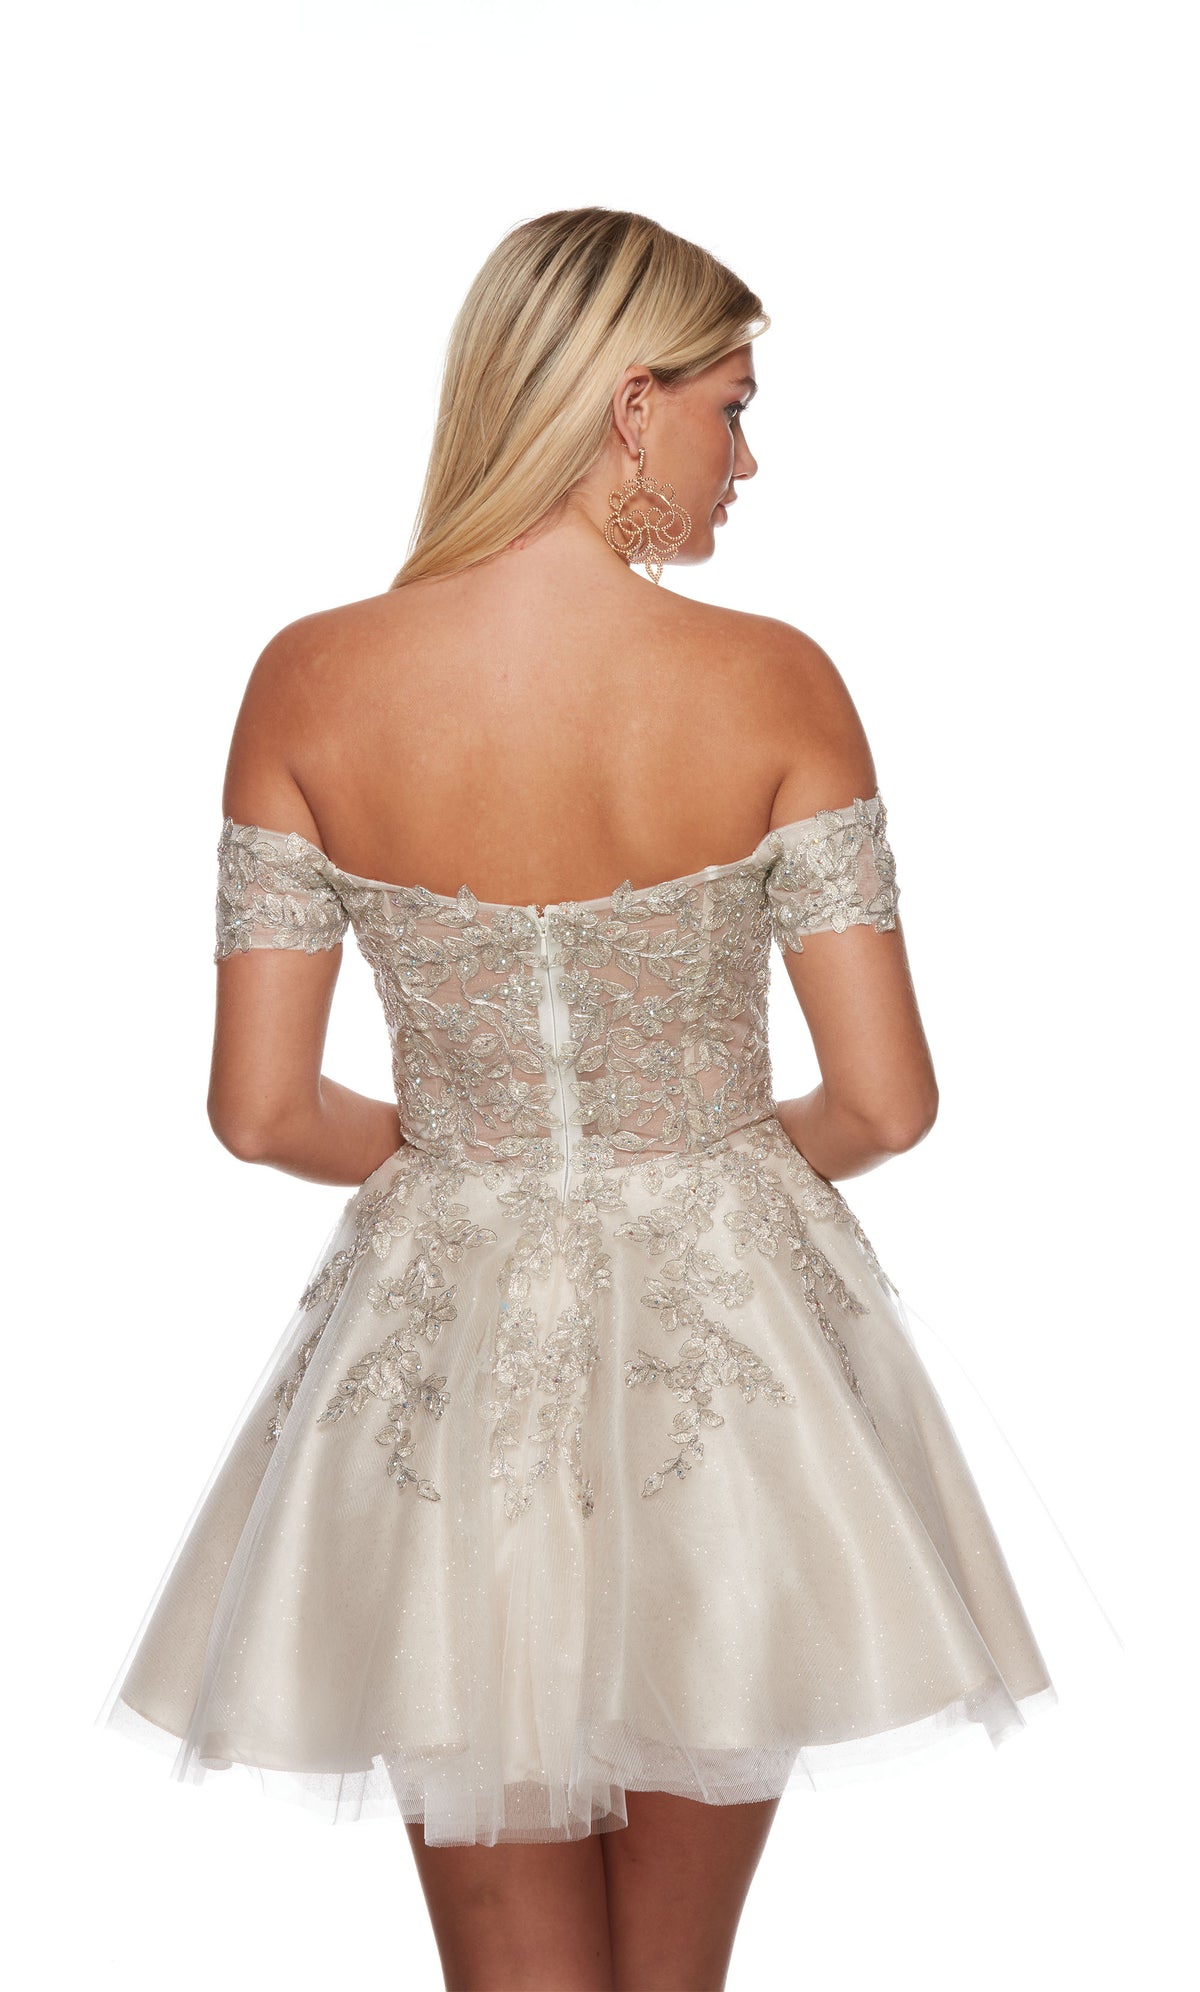 A playful ivory-champagne colored short party dress featuring an off the shoulder neckline, a sheer bodice adorned with floral lace appliques, and a glitter-tulle skirt.